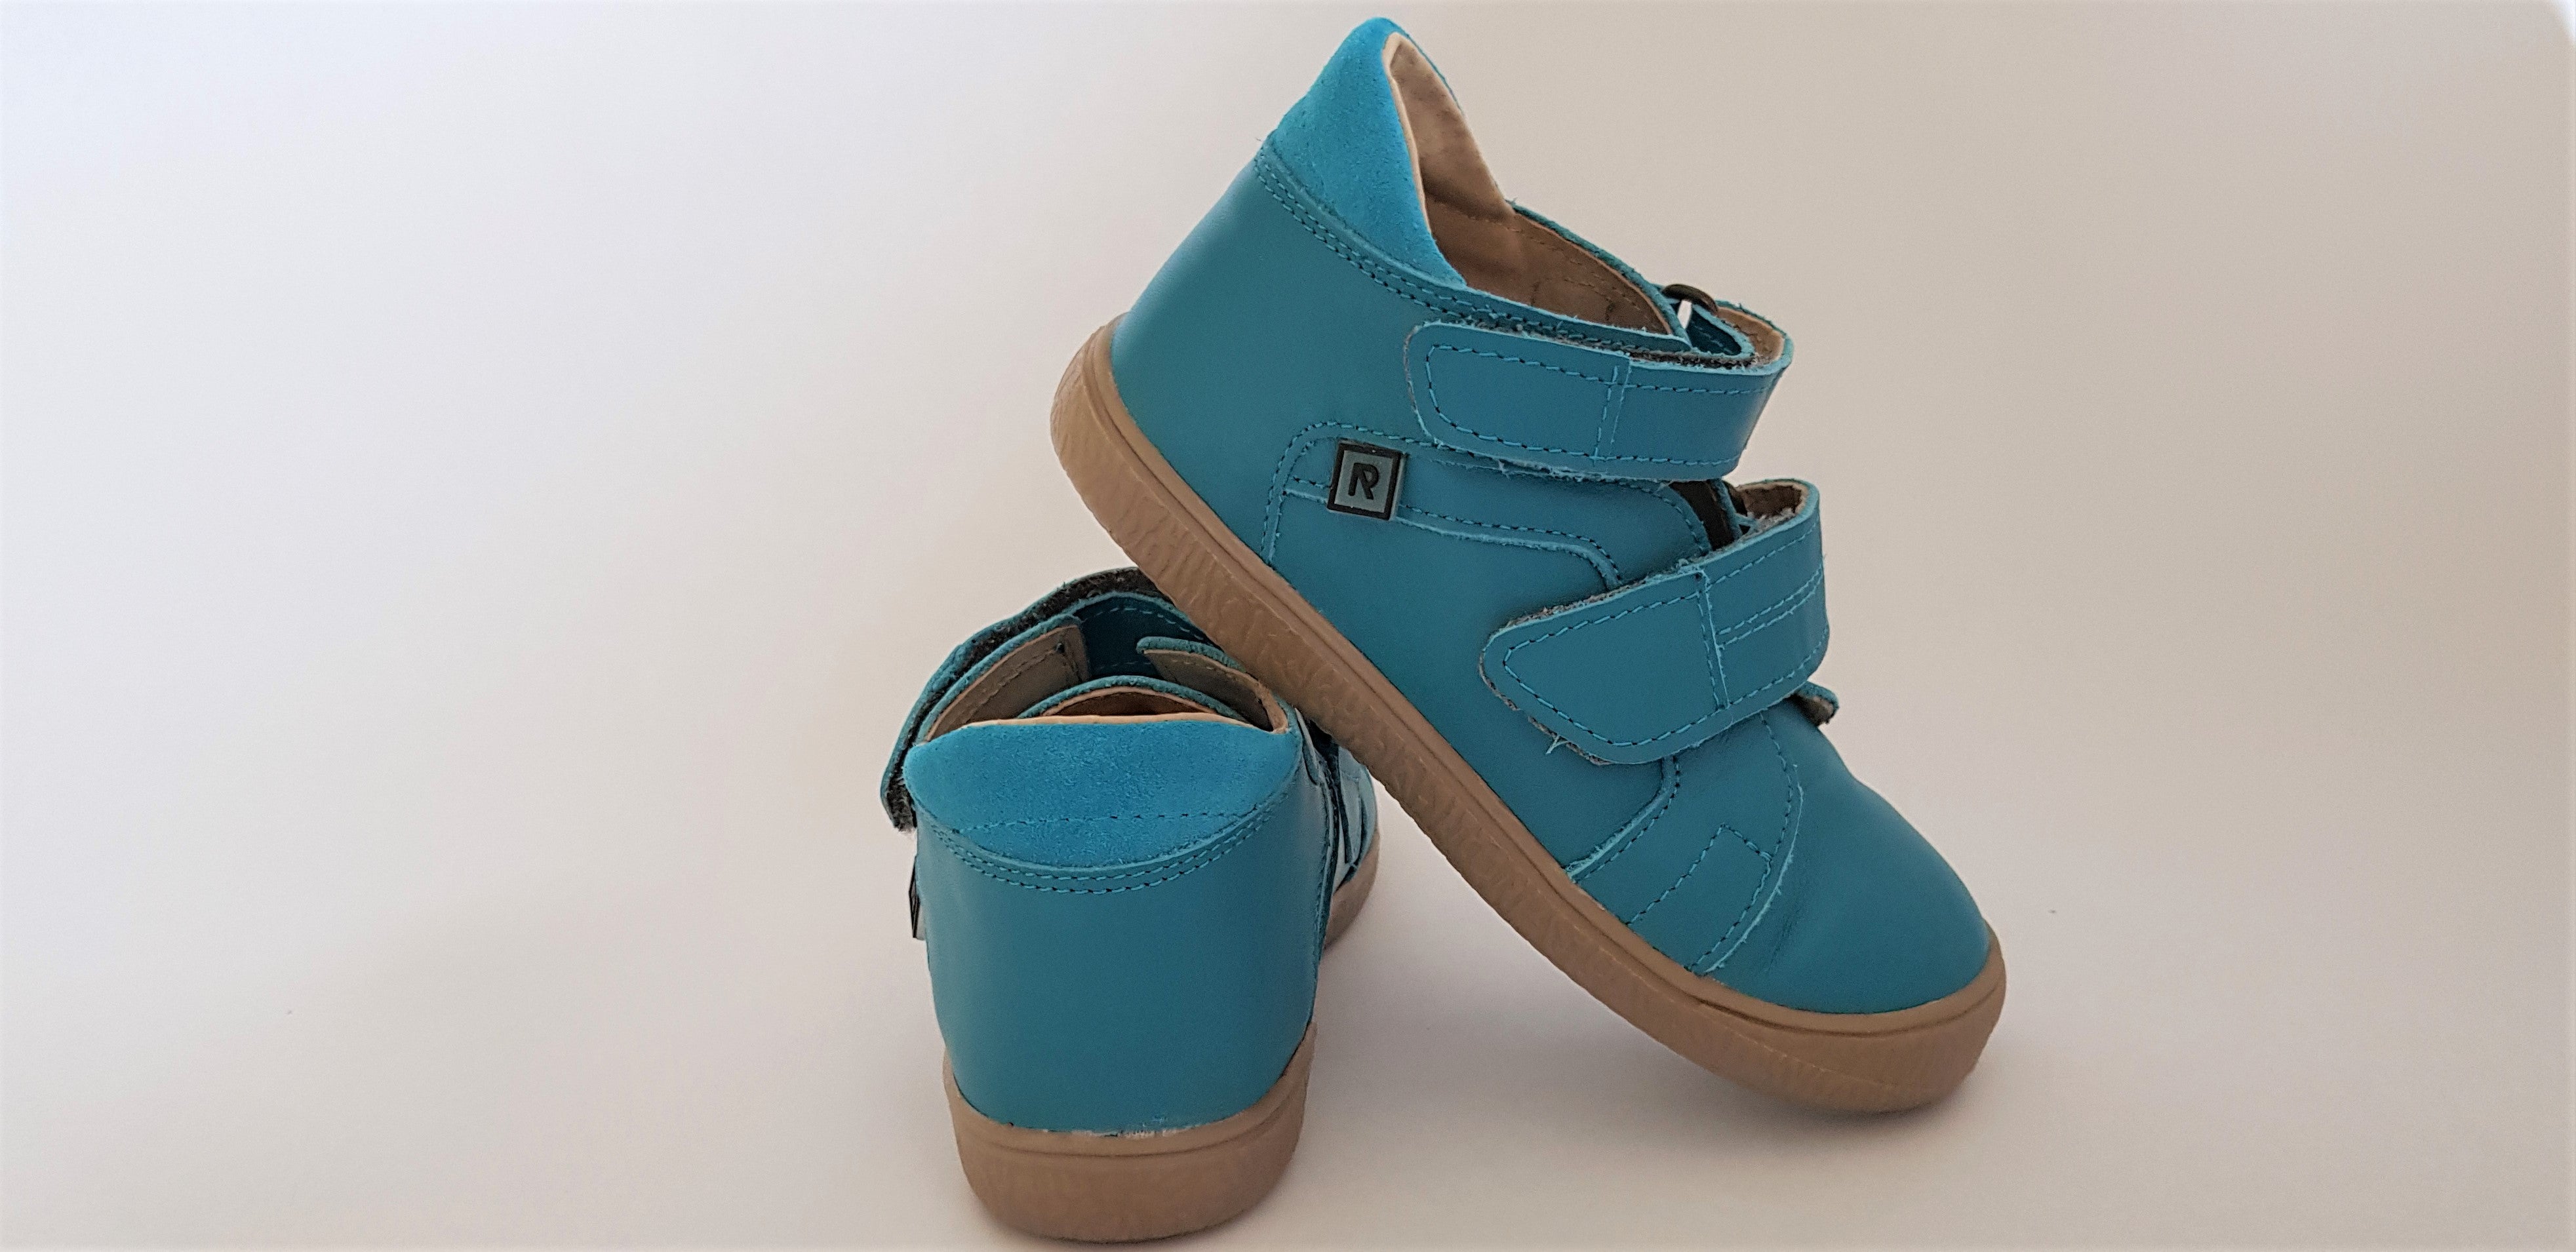 Children's Shoes - Turquoise